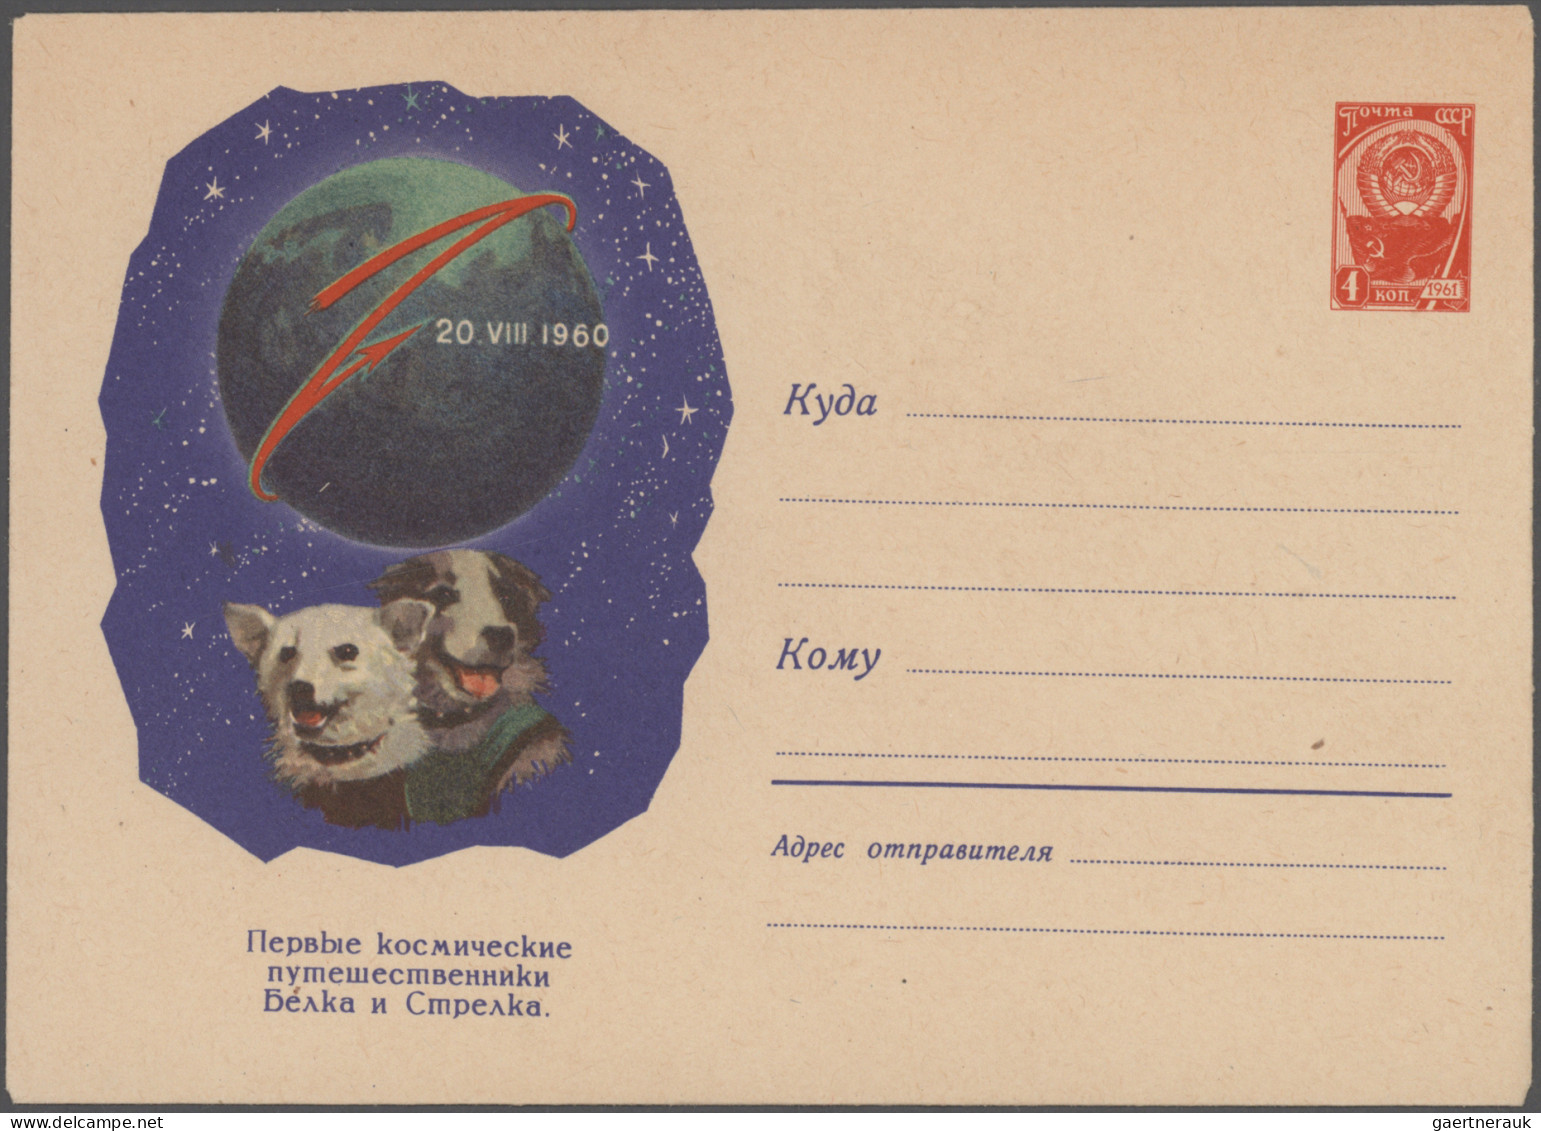 Thematics: animals-dogs: 1900/2000 (ca.), sophisticated collection/balance of ap